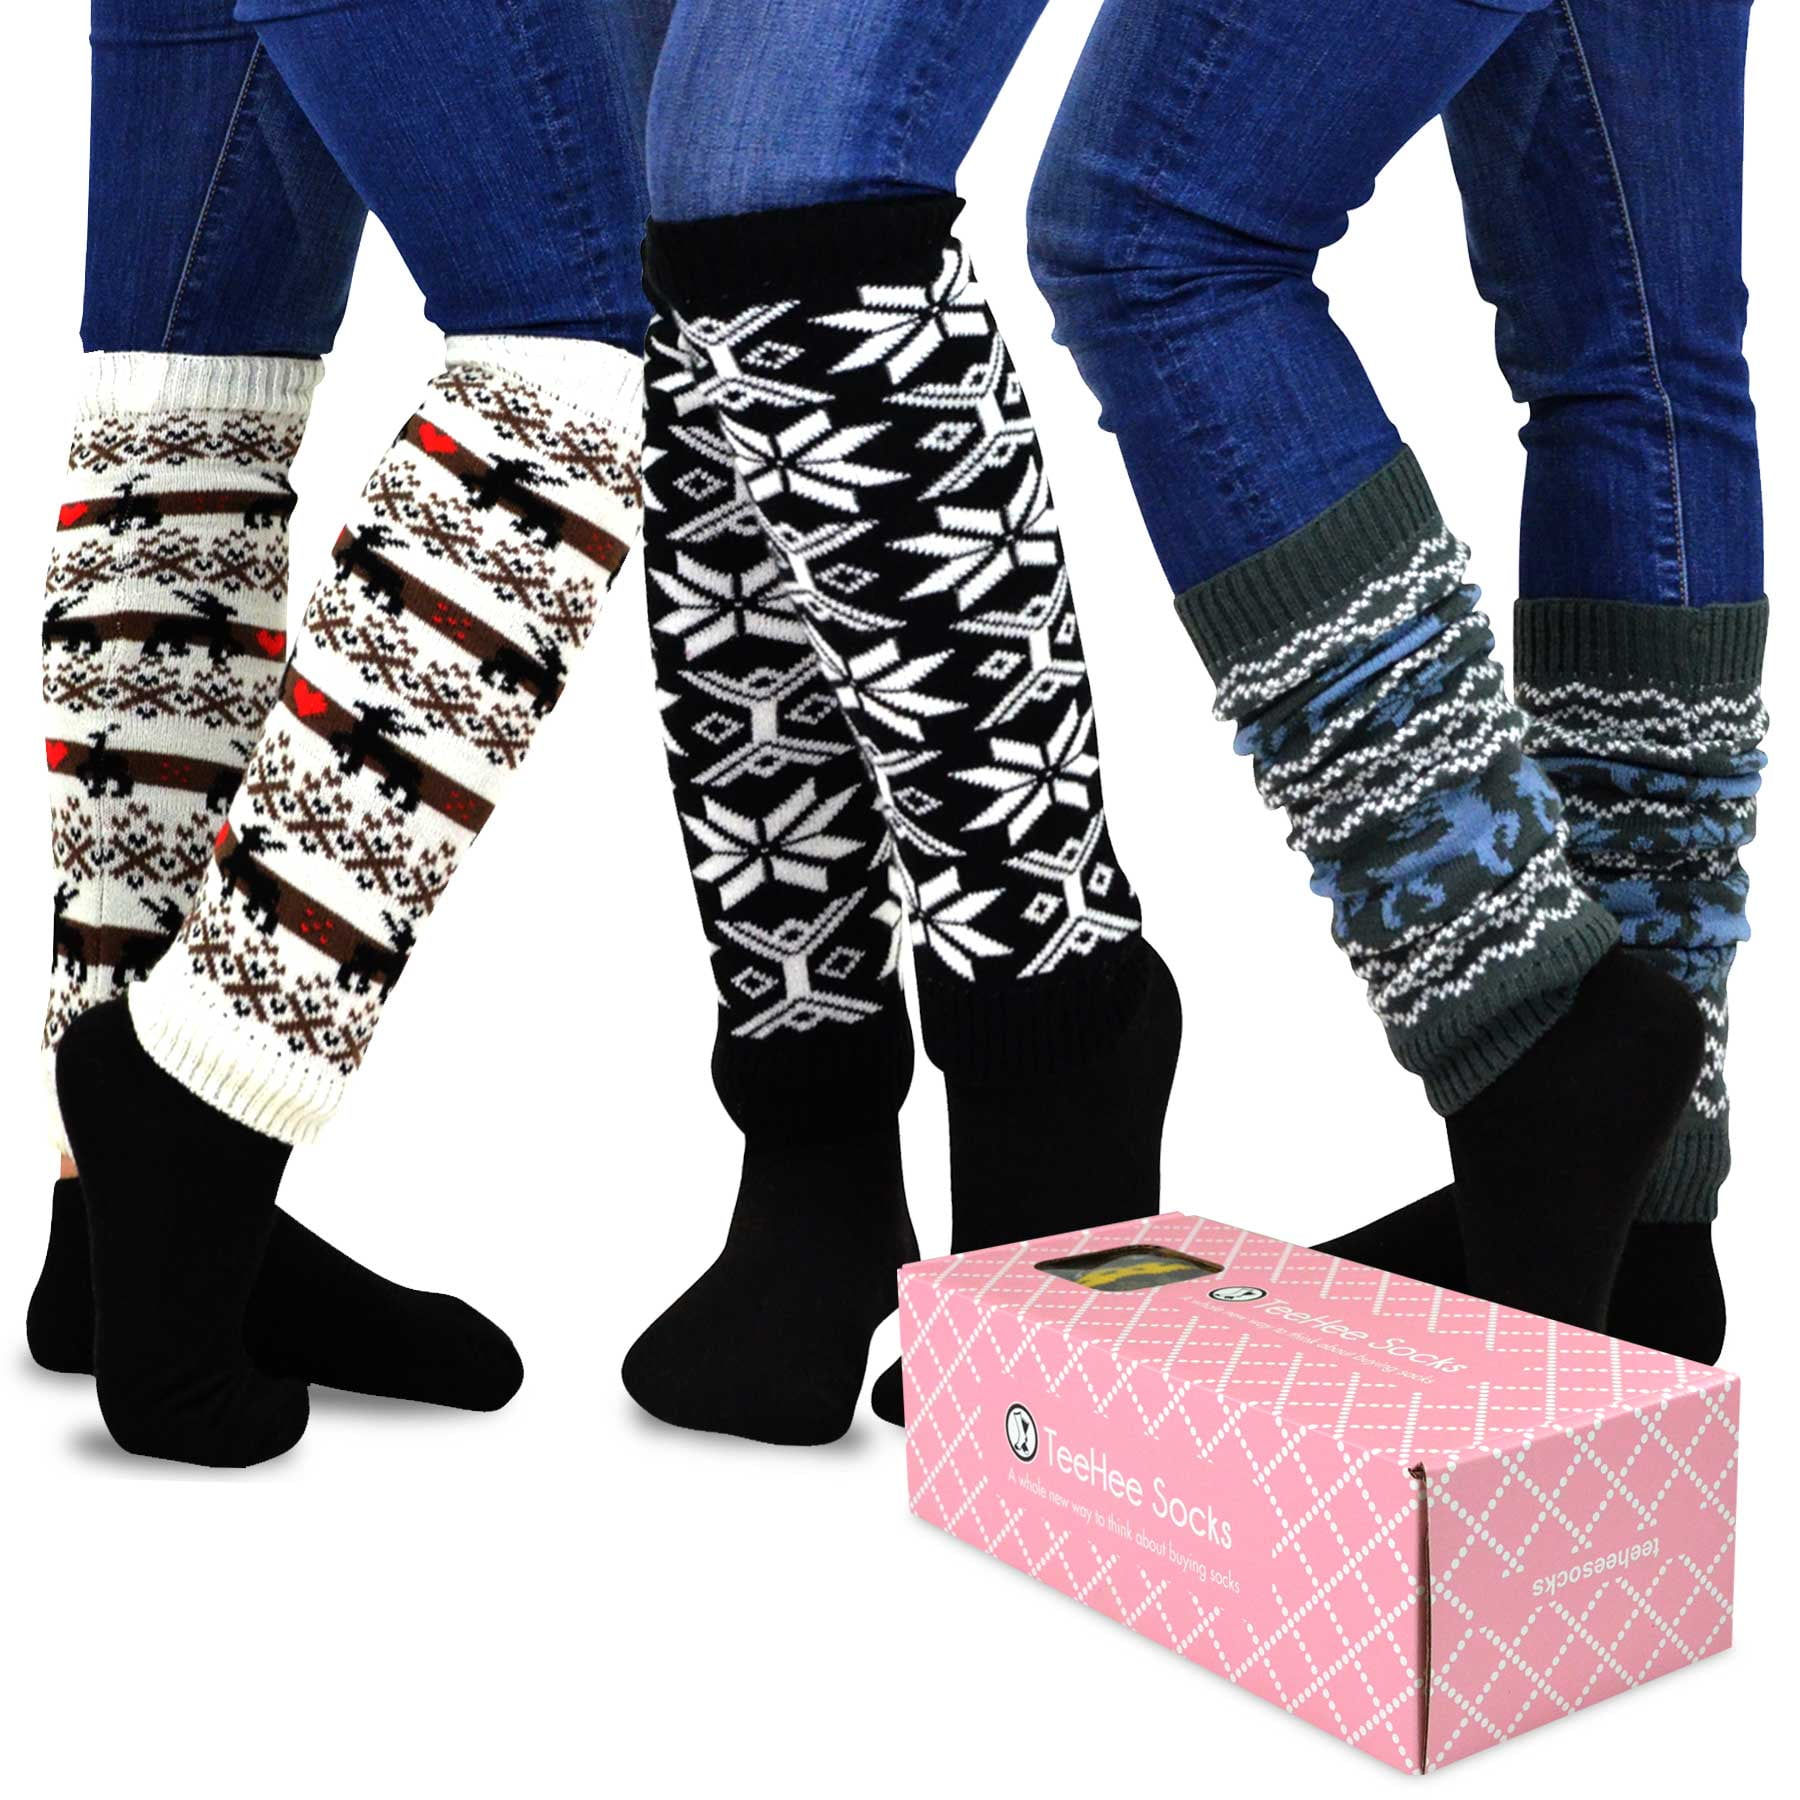 TeeHee Gift Box Womens Fashion Leg Warmers 4-Pack Assorted Colors Winter Snow flakes